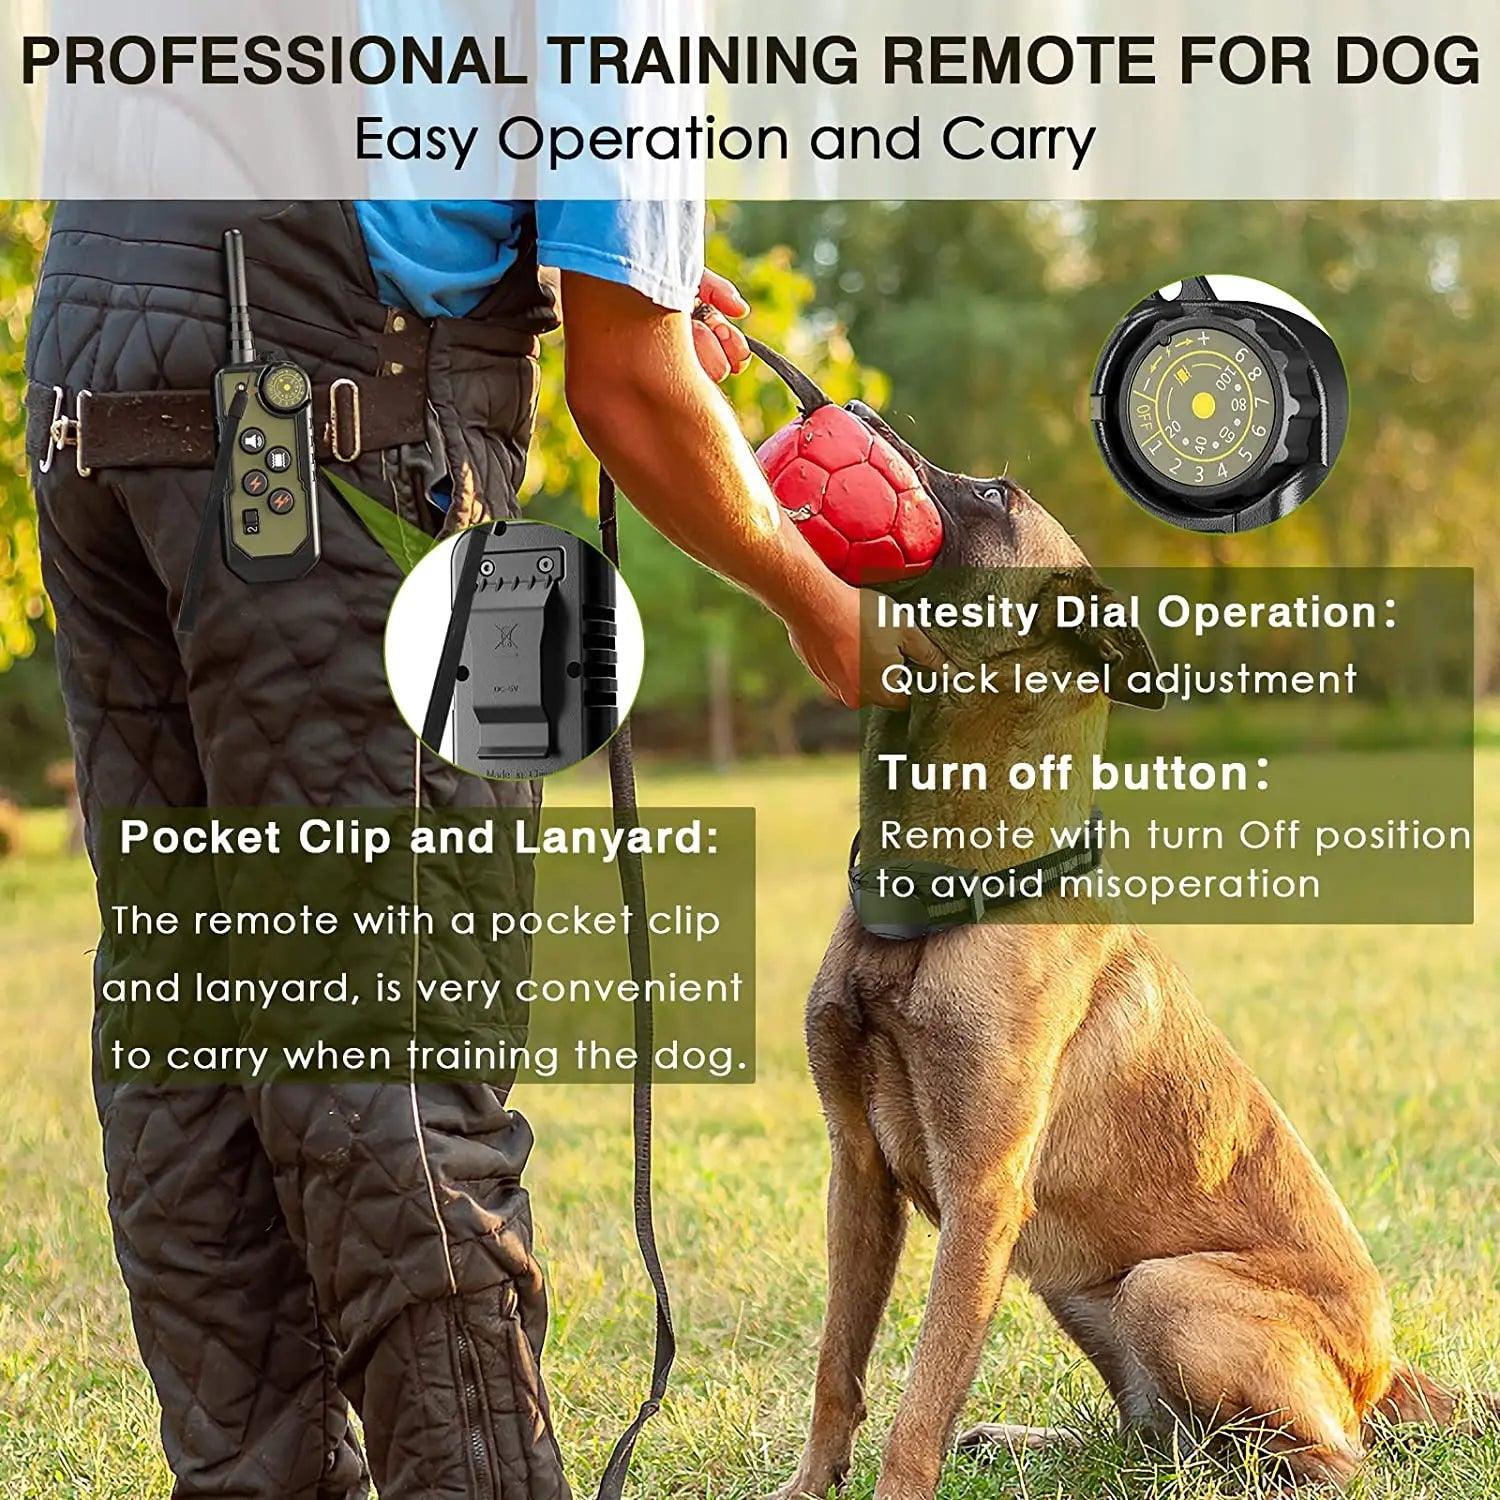 Advanced Electric Dog Training Collar with Waterproof Remote Control - Professional Bark Stopper for All Dog Sizes  ourlum.com   